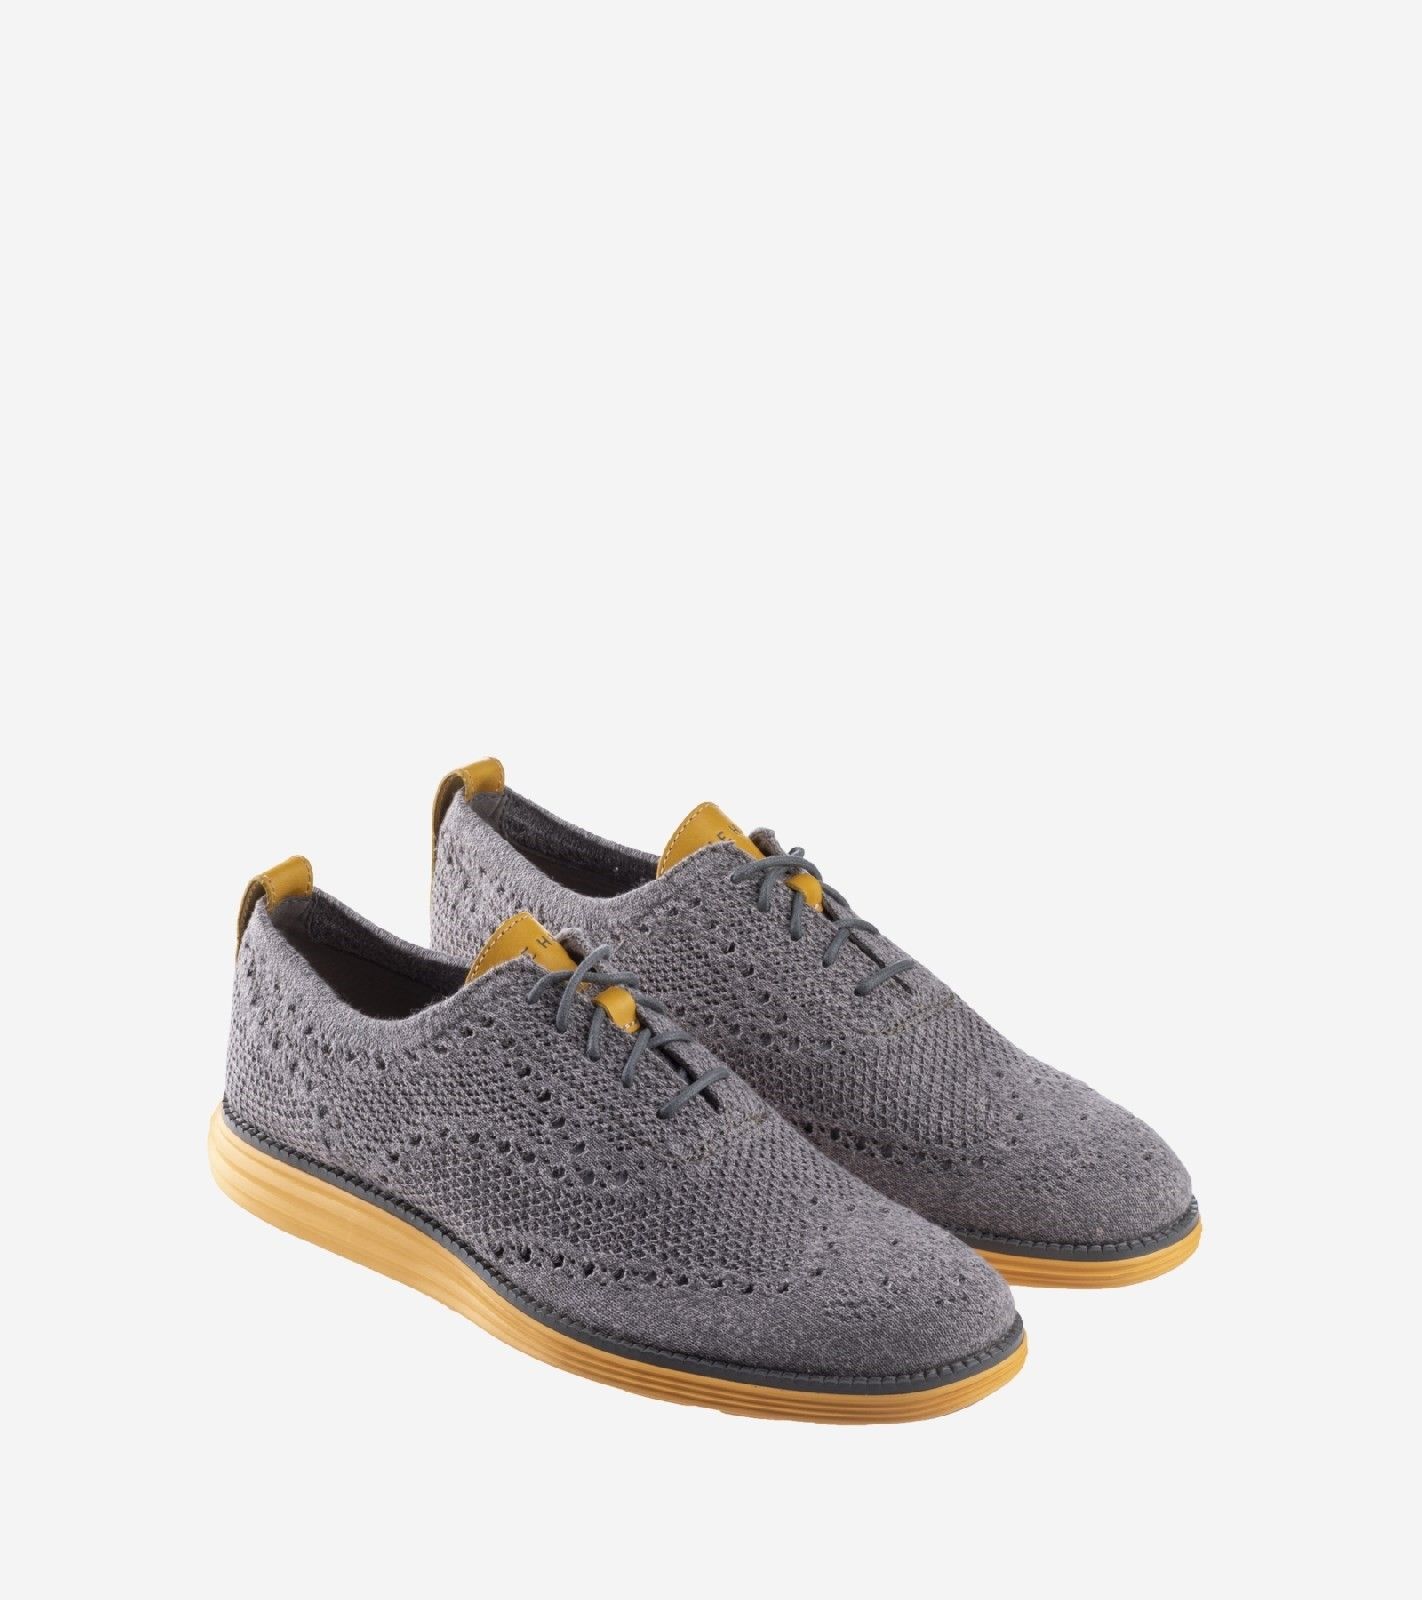 The Men's OriginalGrand Wingtip Oxford is crafted in ultra-breathable Stitchlite knit, these oxfords are designed to maximize airflow between the shoe and your foot. Our Grand.OS energy foam brings targeted comfort to every step All over knit oxford upper. 
Fully padded sock lining for ultimate comfort.. 
EVA midsole cushioned with our signature GRAND.OS technology, with rubber outsole..